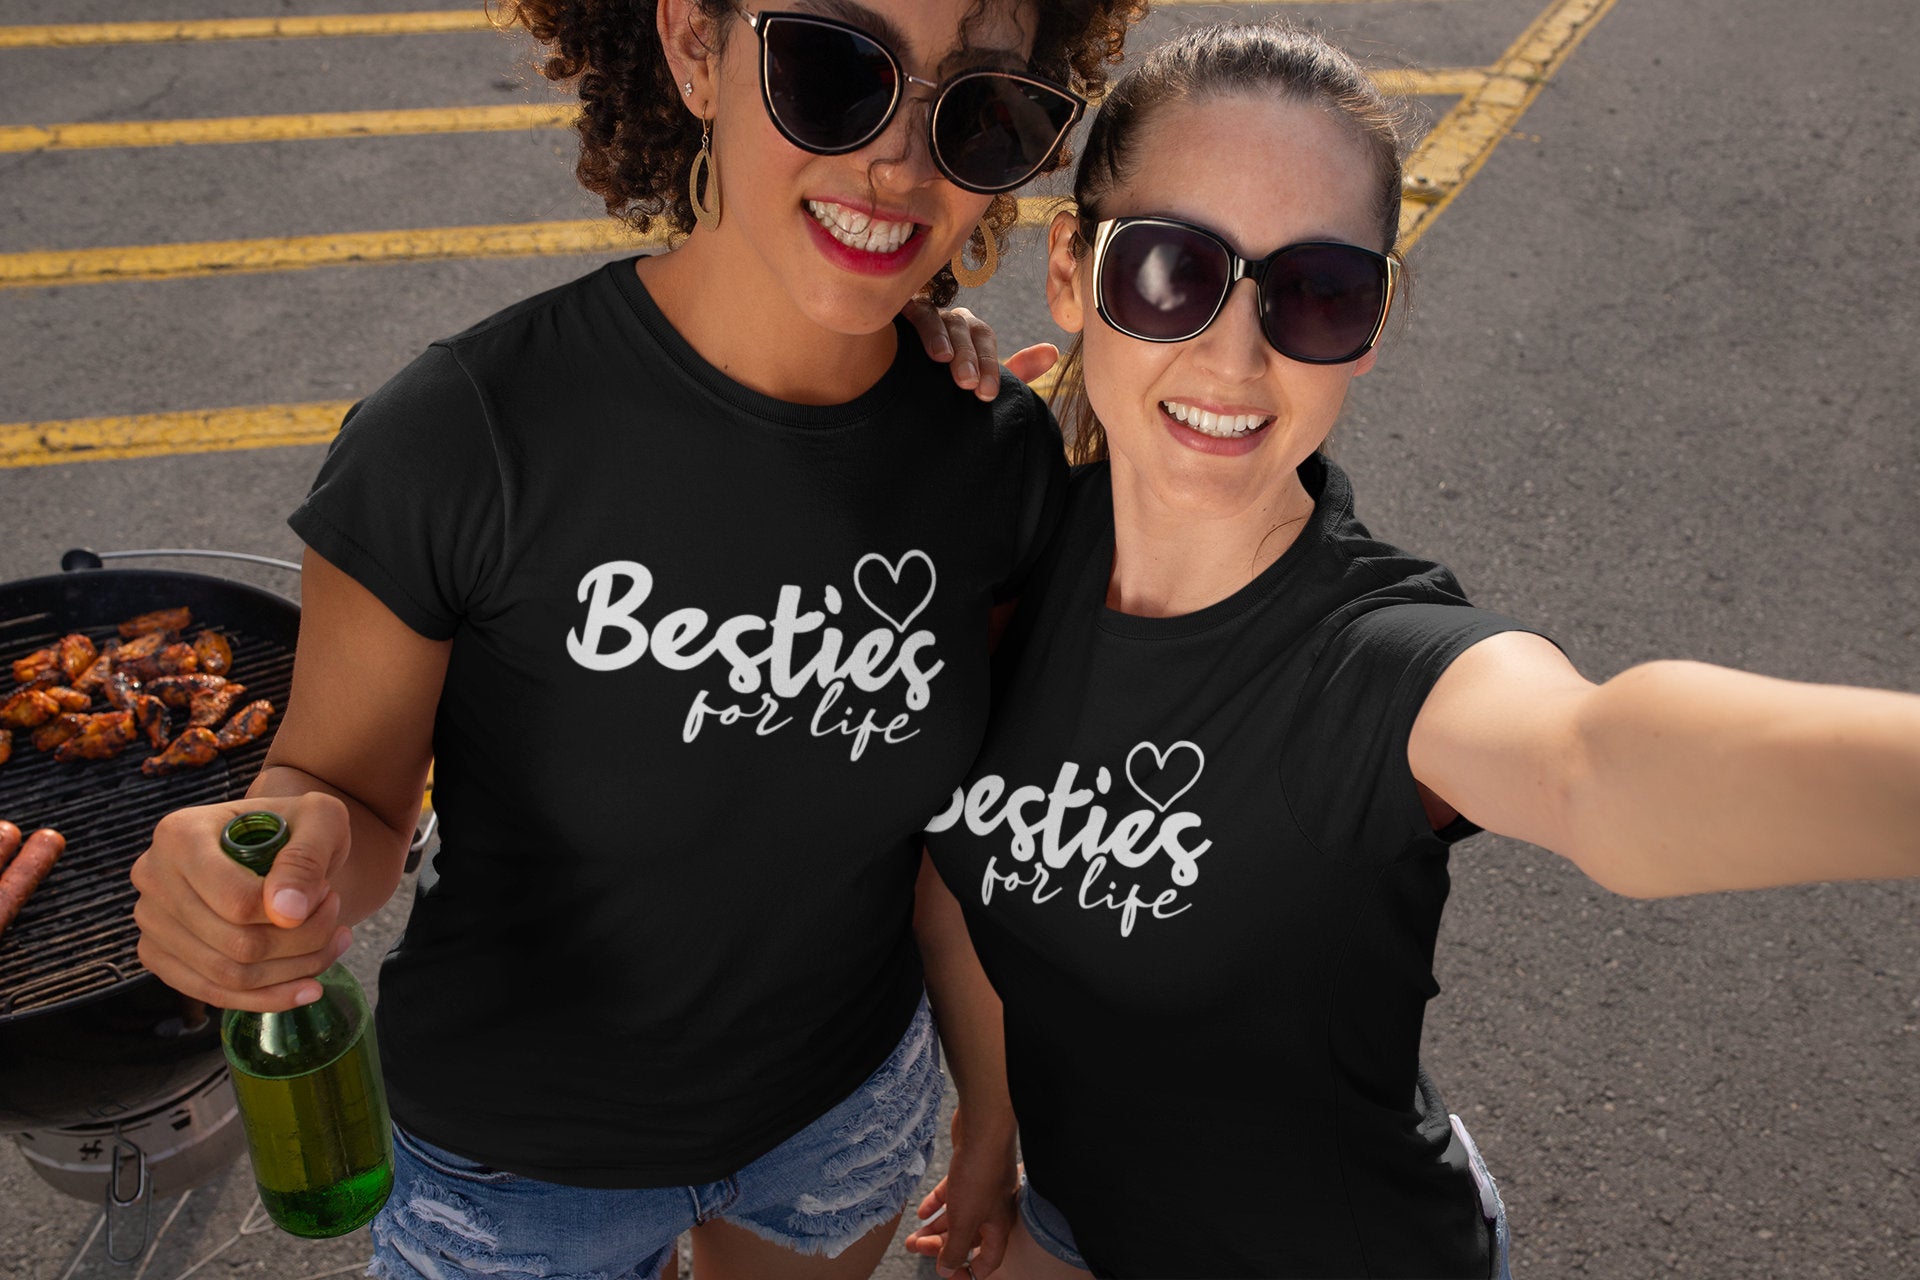 20 Personalized Gift Ideas for Your Bestie (With DIY & Buy Options) -  College Fashion | Best friend t shirts, Bff shirts, Bestie shirts